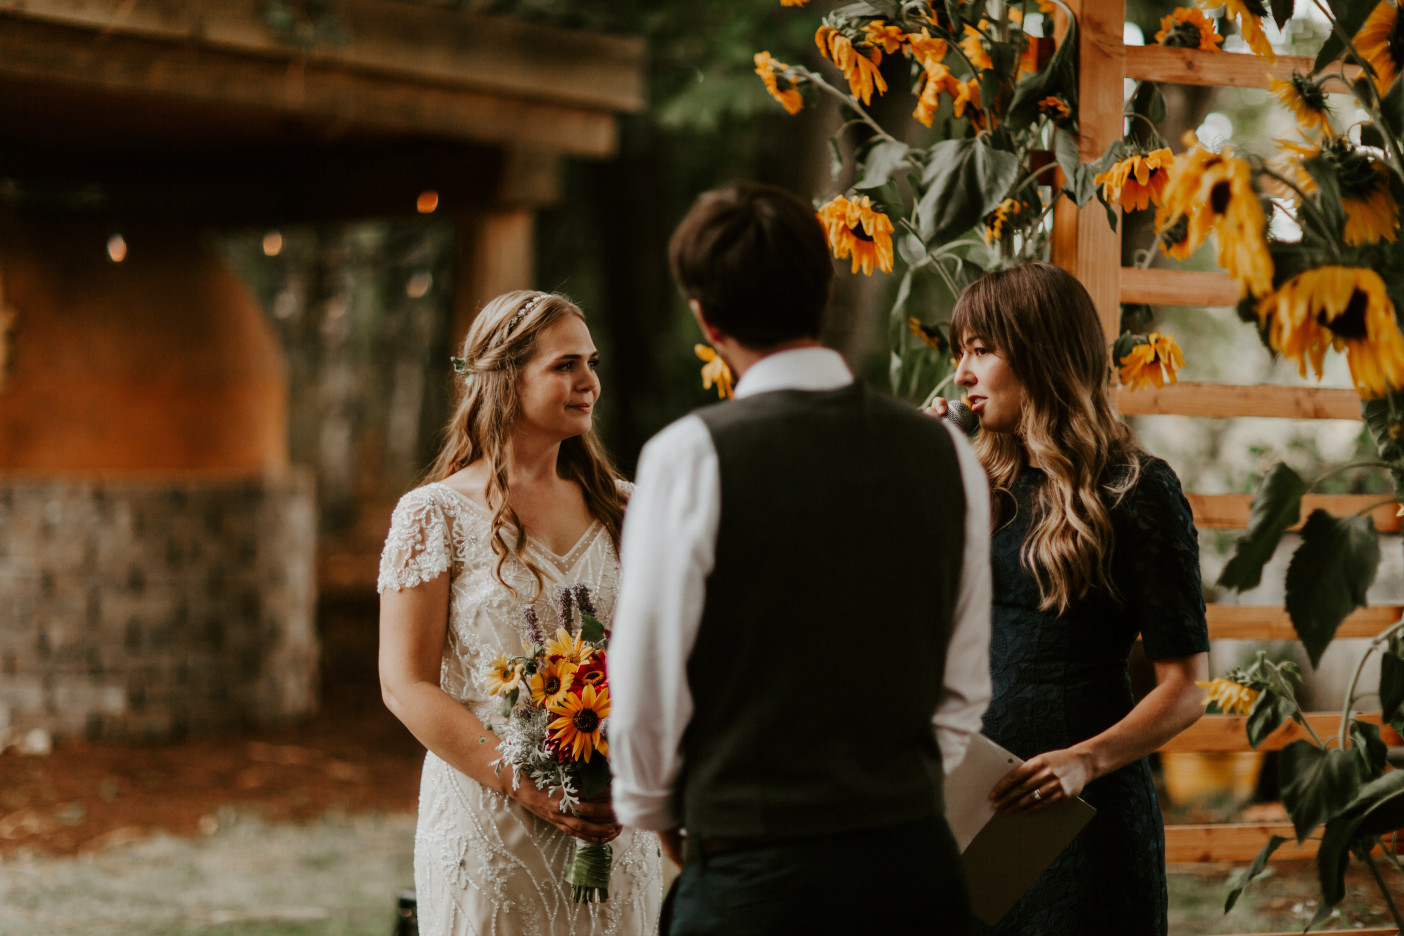 Hannah and Dan face each other at the altar in Corvallis, Oregon. Intimate wedding photography in Corvallis Oregon by Sienna Plus Josh.